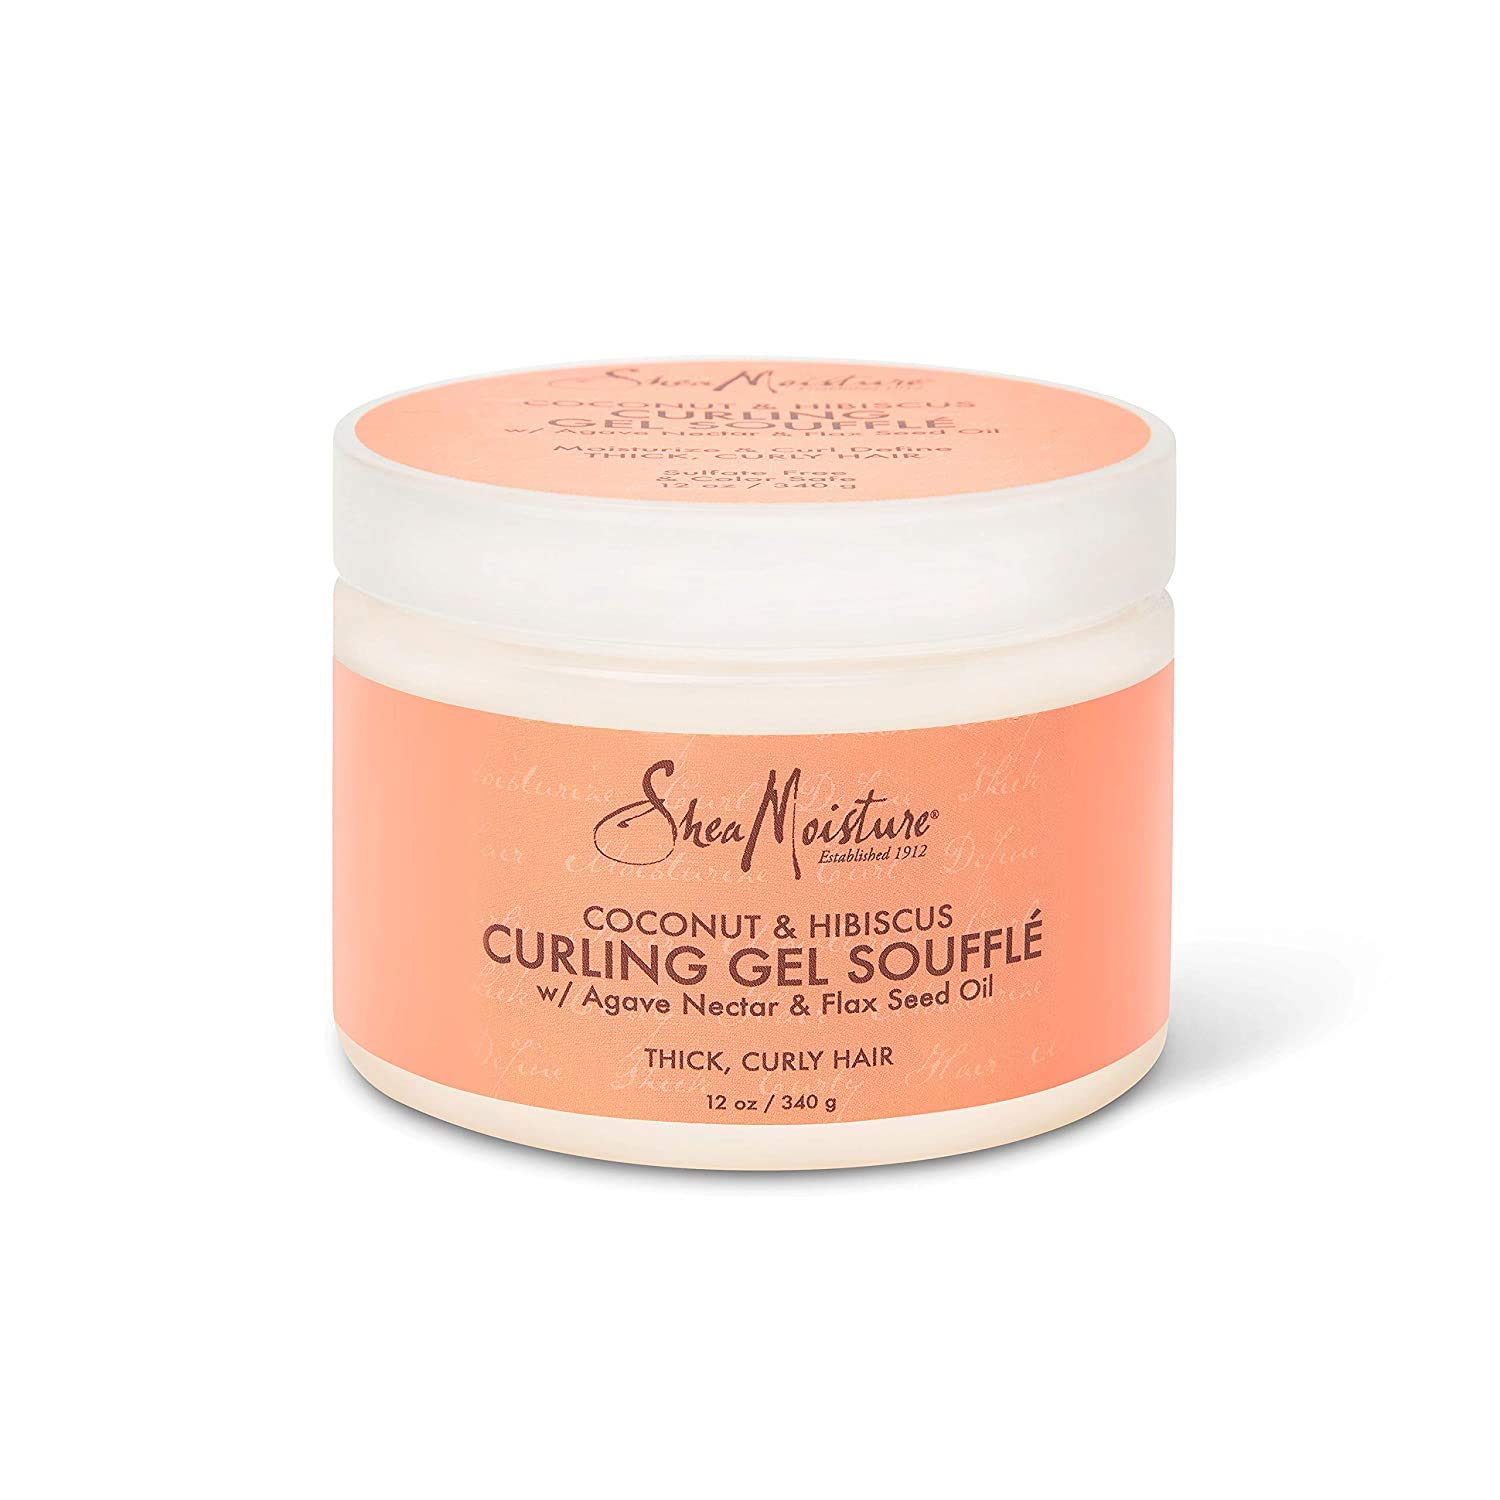 Shea Moisture Coconut and Hibiscus Curling Gel Souffle